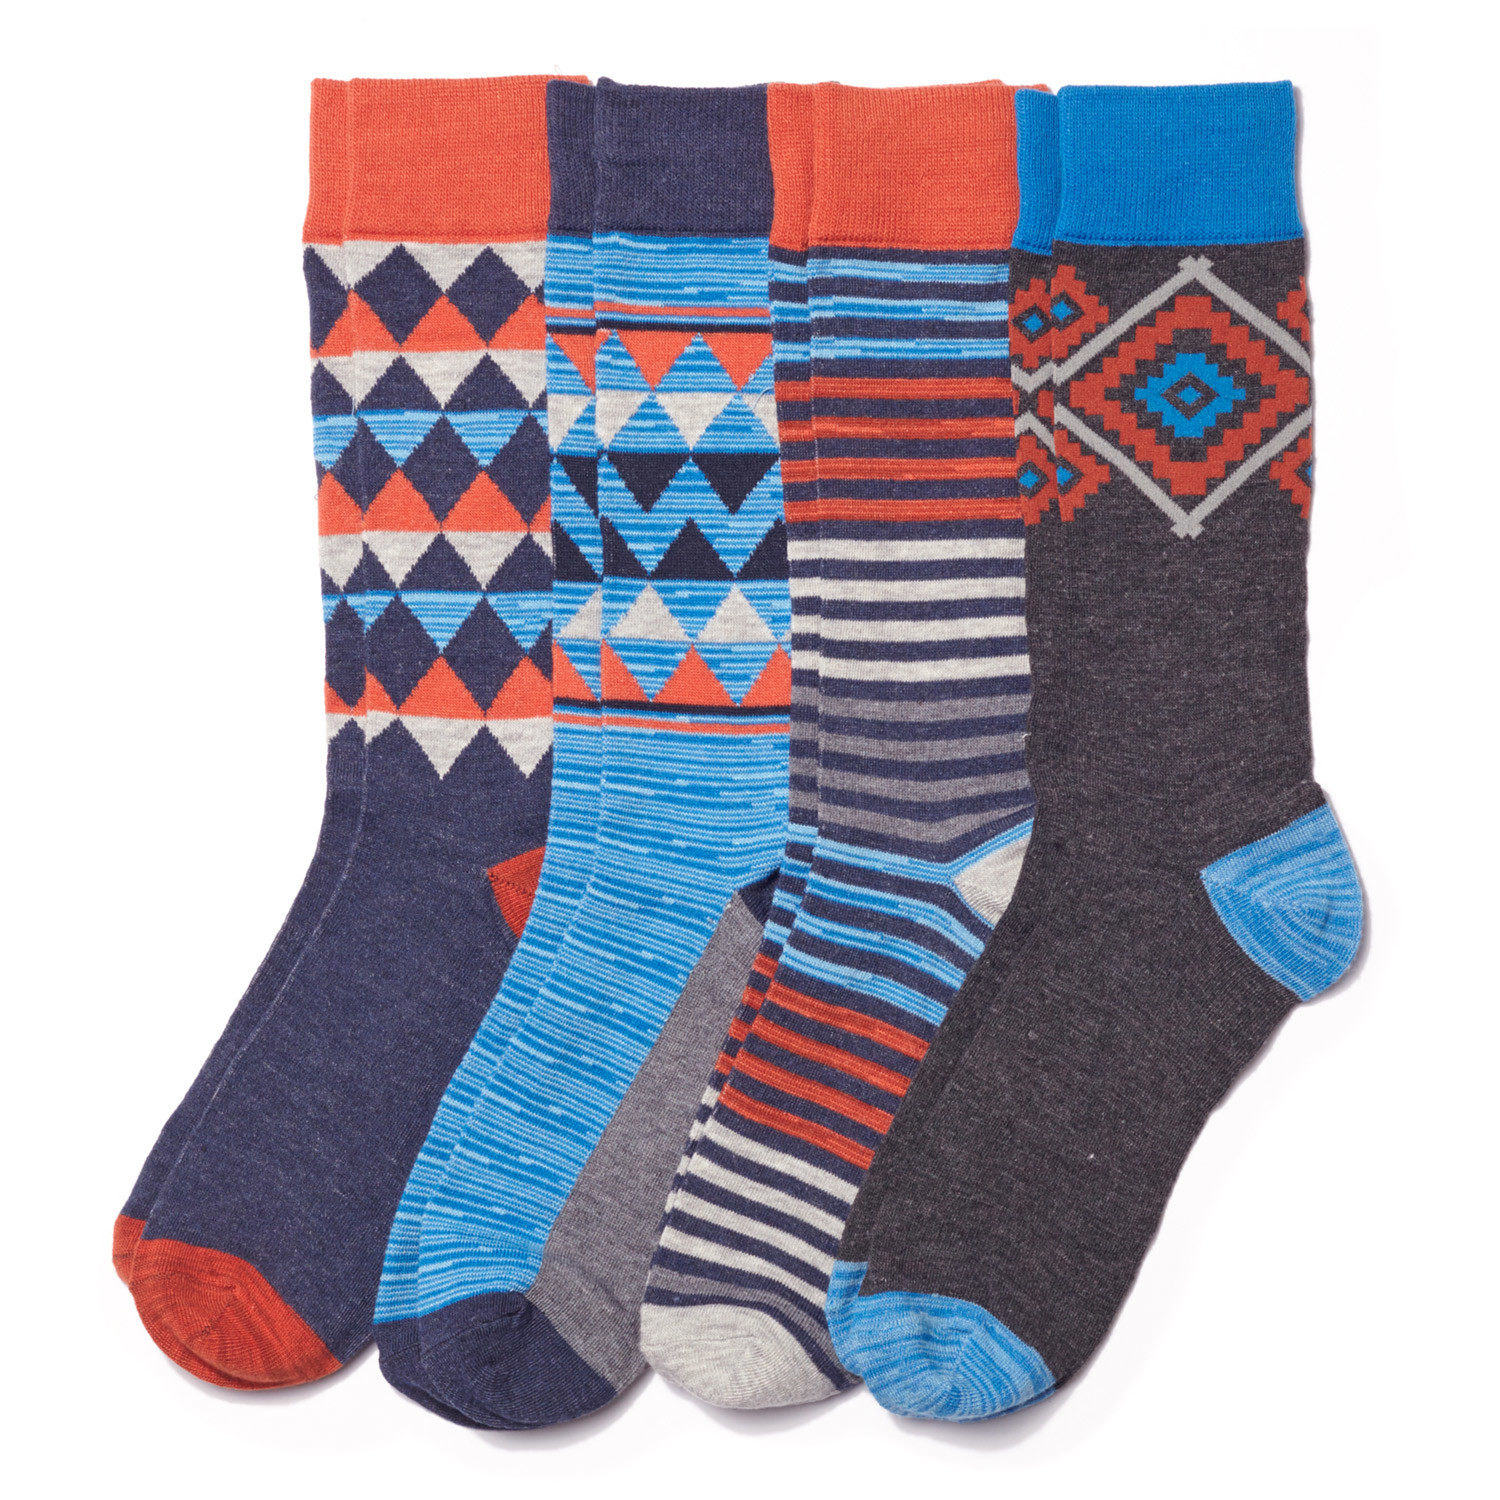 Stripes + Colorblock Sock // Multi // Pack of 4 - Basic/Outfitters ...